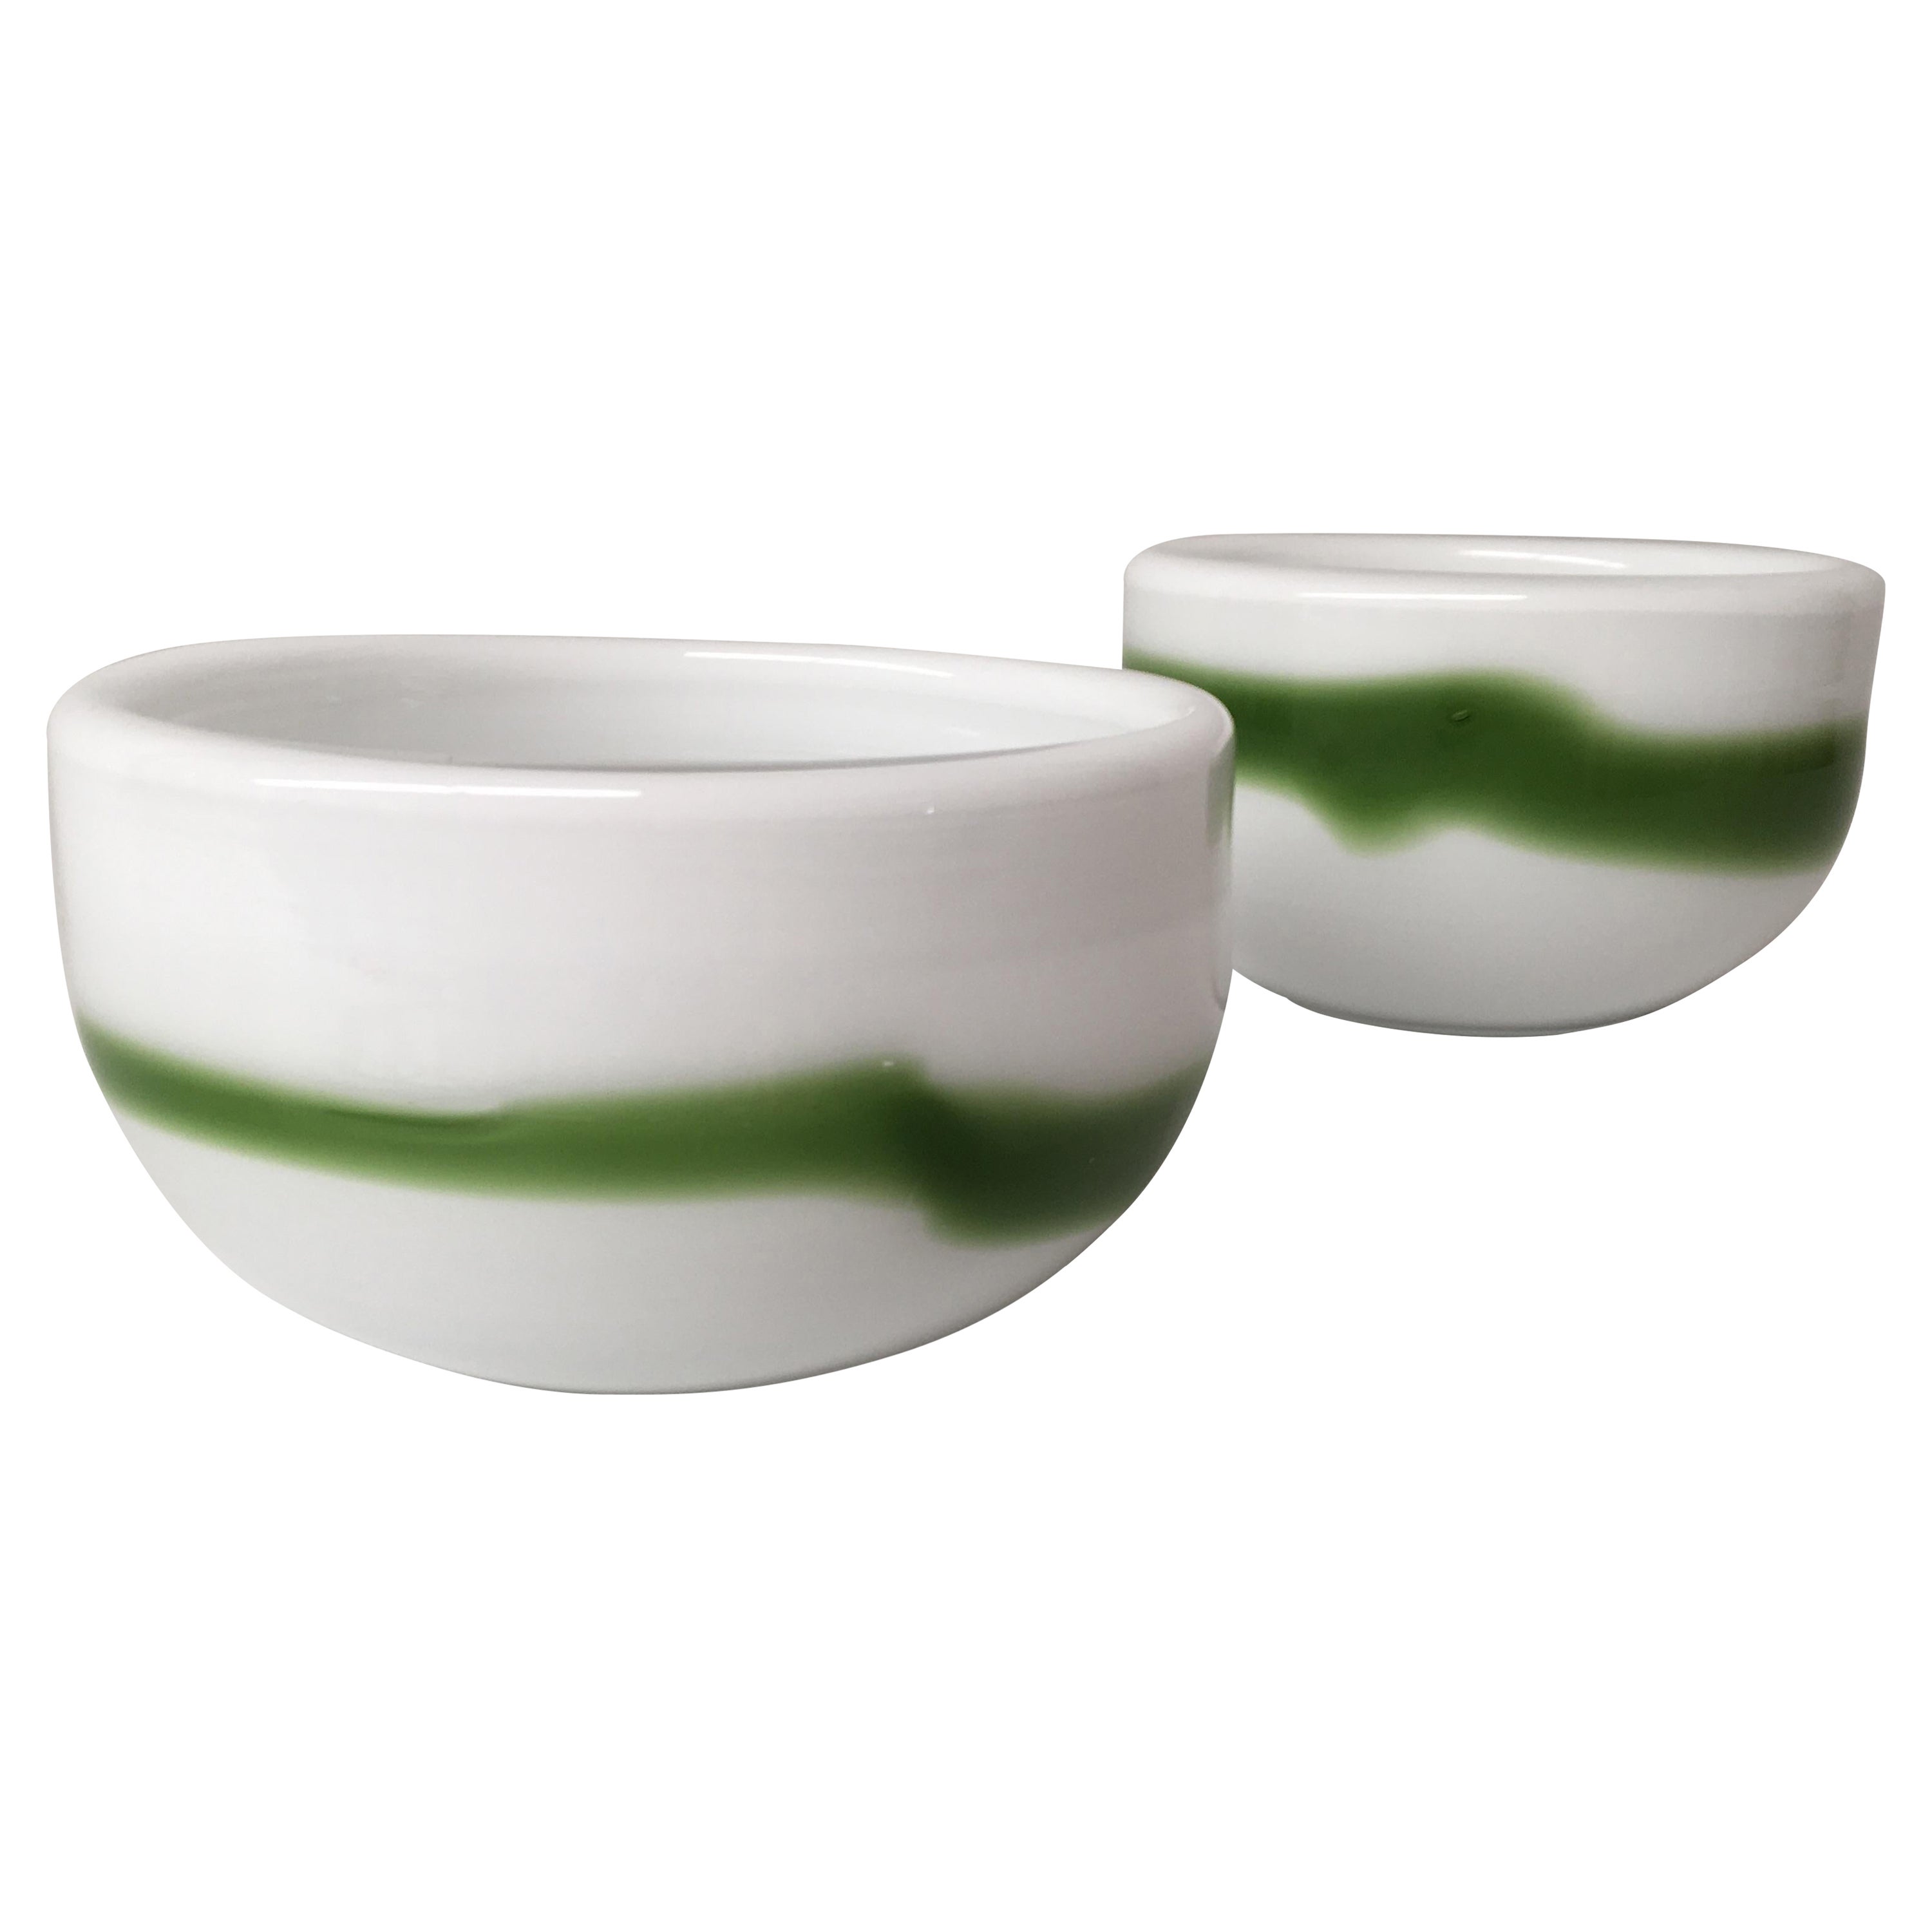 1970sTwo White Danish Handblown Glass Bowls by Michael Bang for Holmegaard